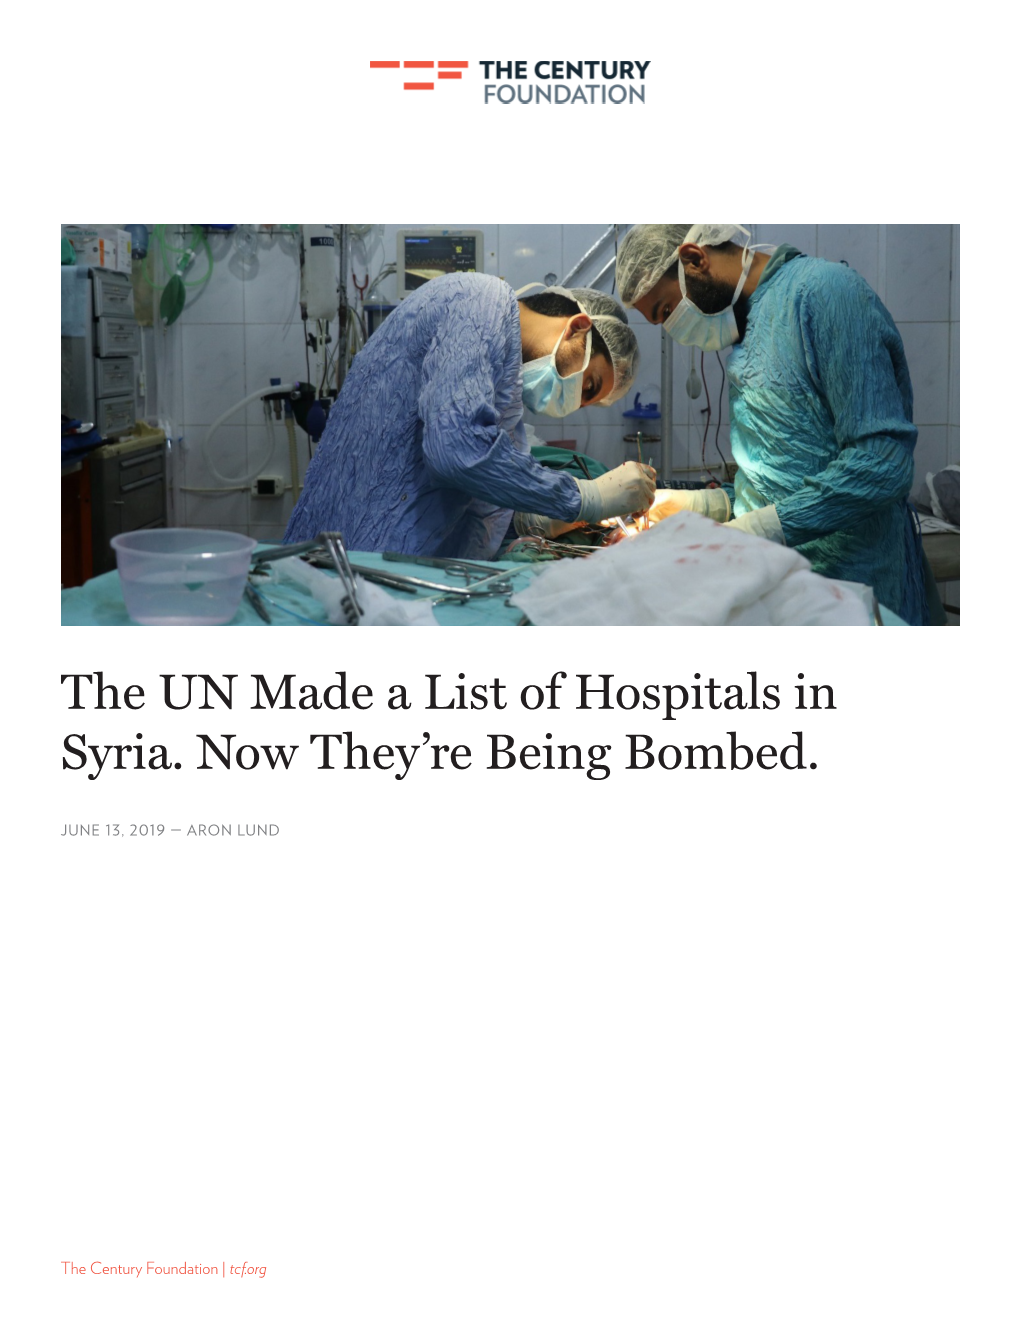 The UN Made a List of Hospitals in Syria. Now They're Being Bombed